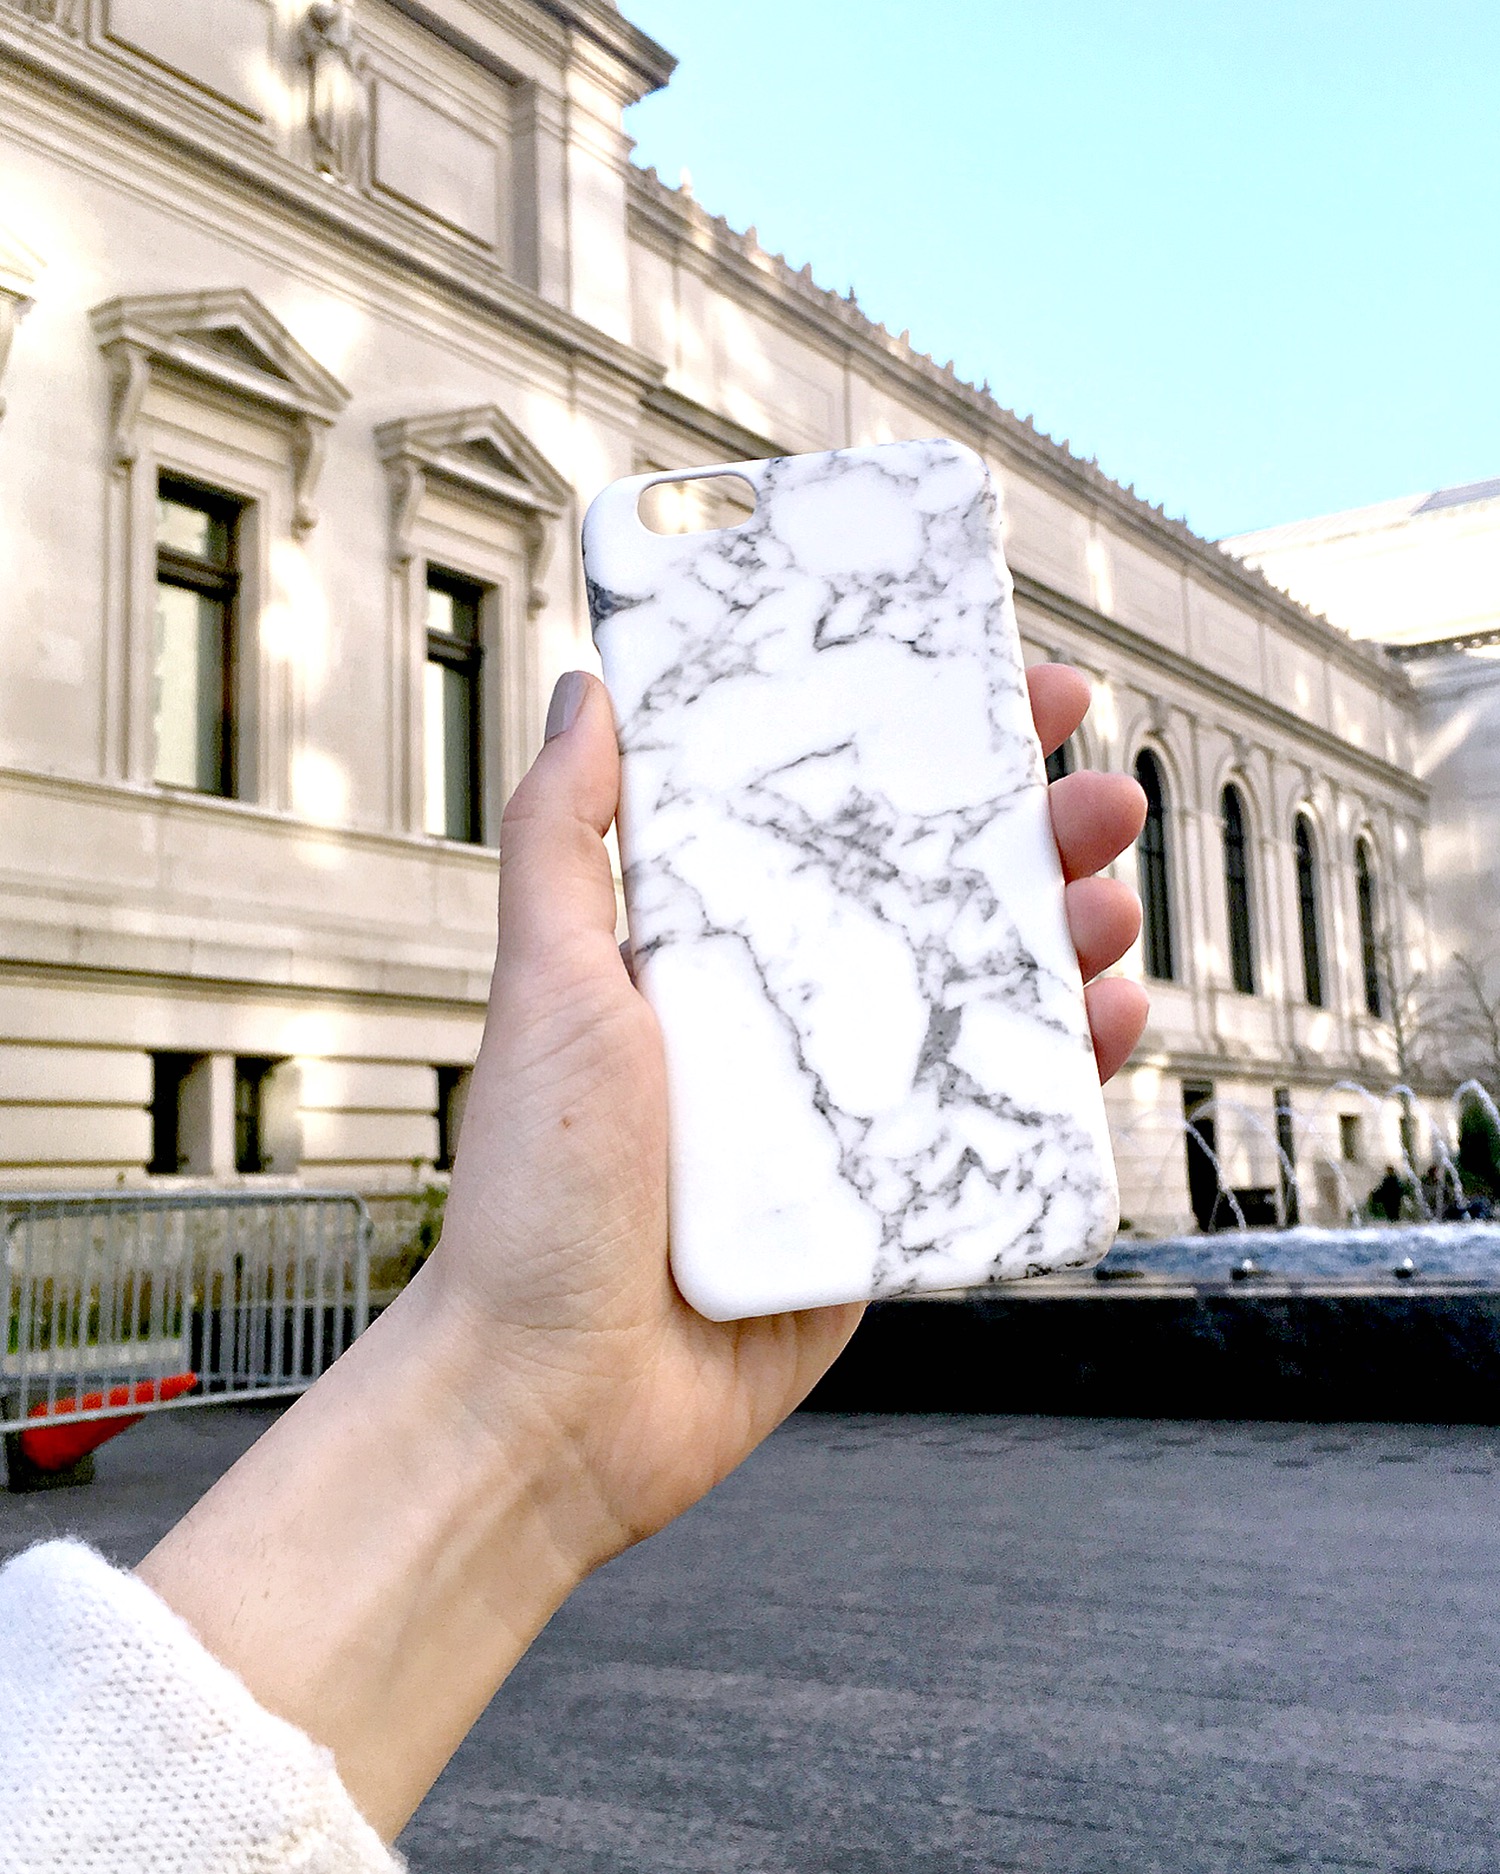 Marble iPhone Case Caseapp Louboutins & Love Fashion Blog Esther Santer NYC Street Style Blogger Product Review Model Girl Women Hair Choker Cold Shoulder Photography Photoshoot New York City Nails Phone Trendy Shop Giveaway Buy Discount Code Outdoors.jpg